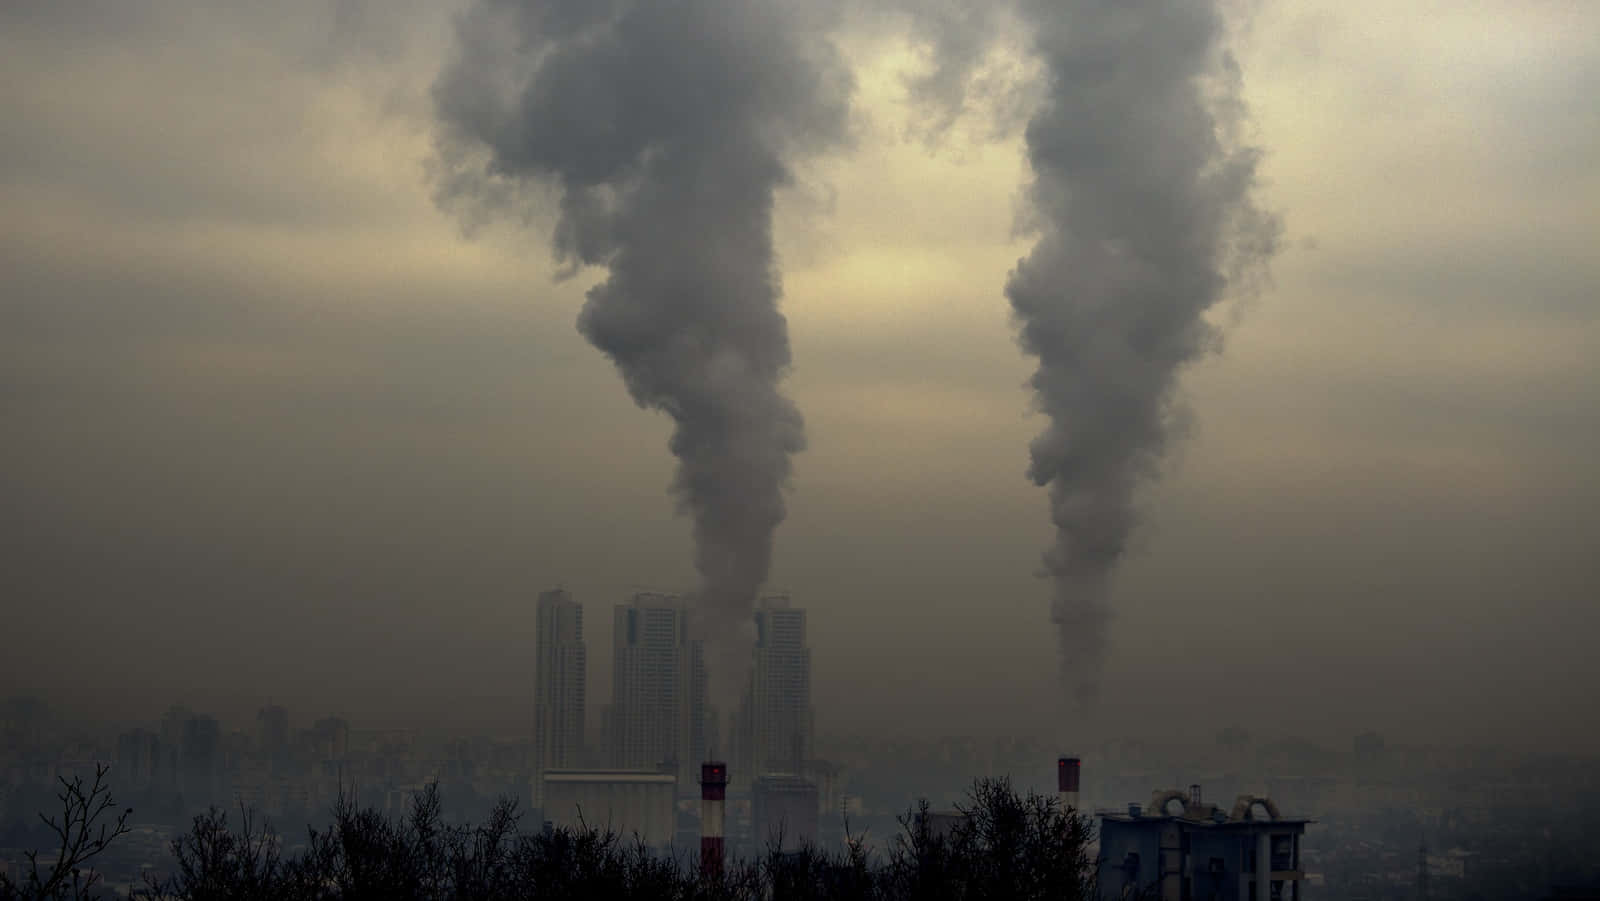 Pollution - Toxic Fumes Impacting our Ecosystem